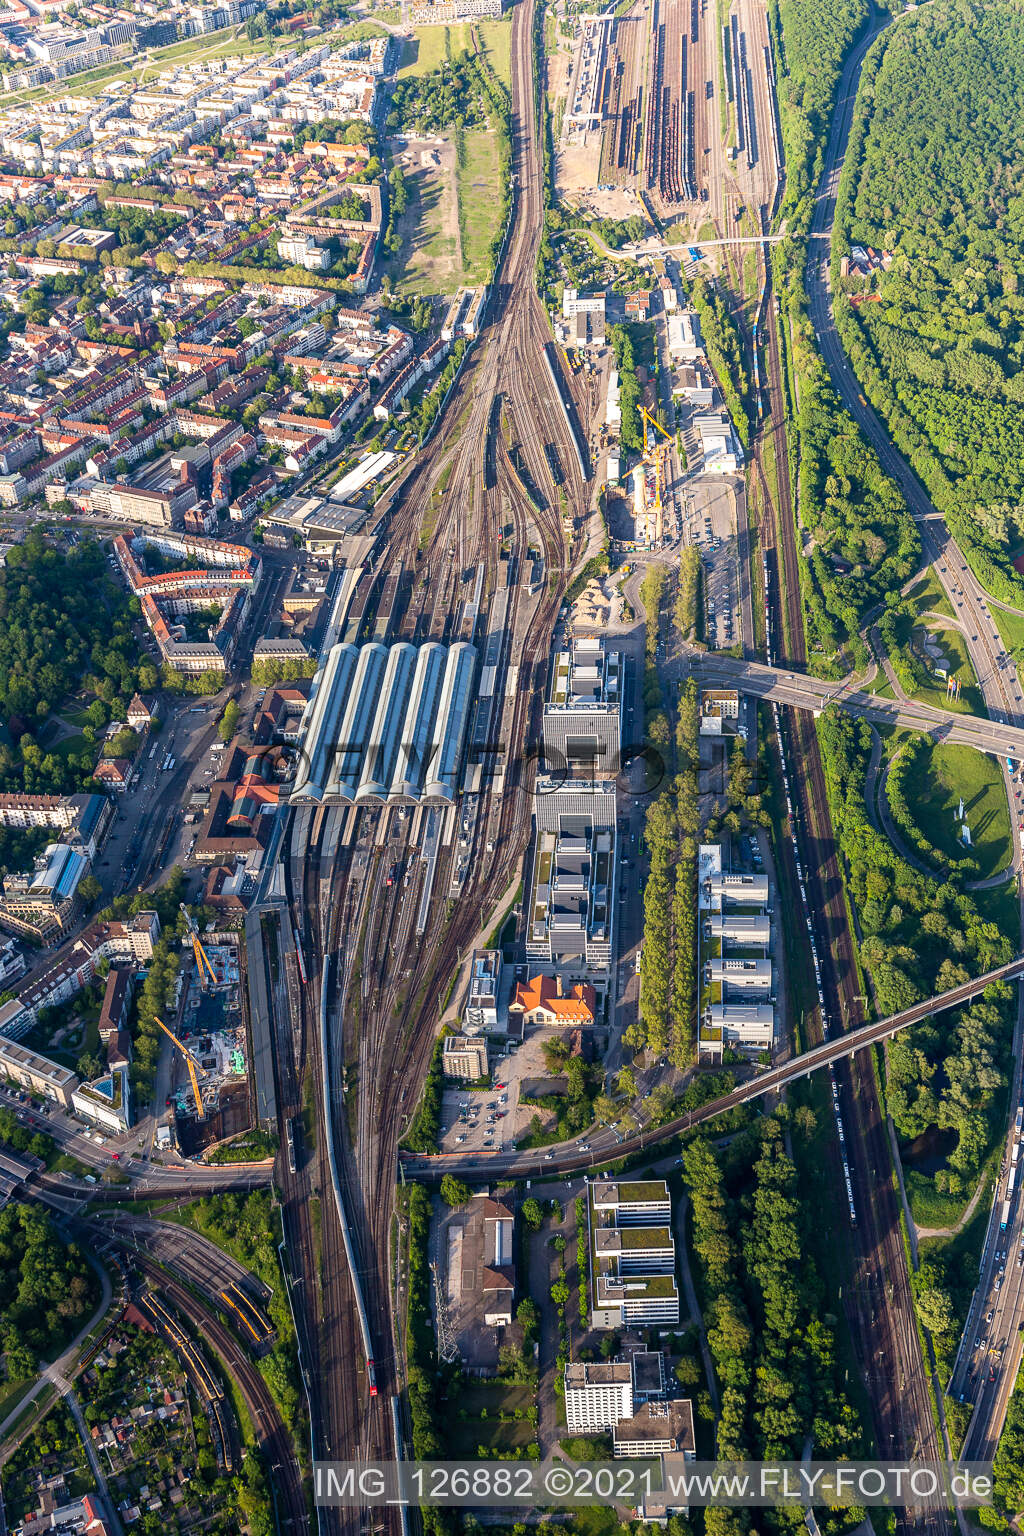 Main station Karlsruhe in the district Südweststadt in Karlsruhe in the state Baden-Wuerttemberg, Germany